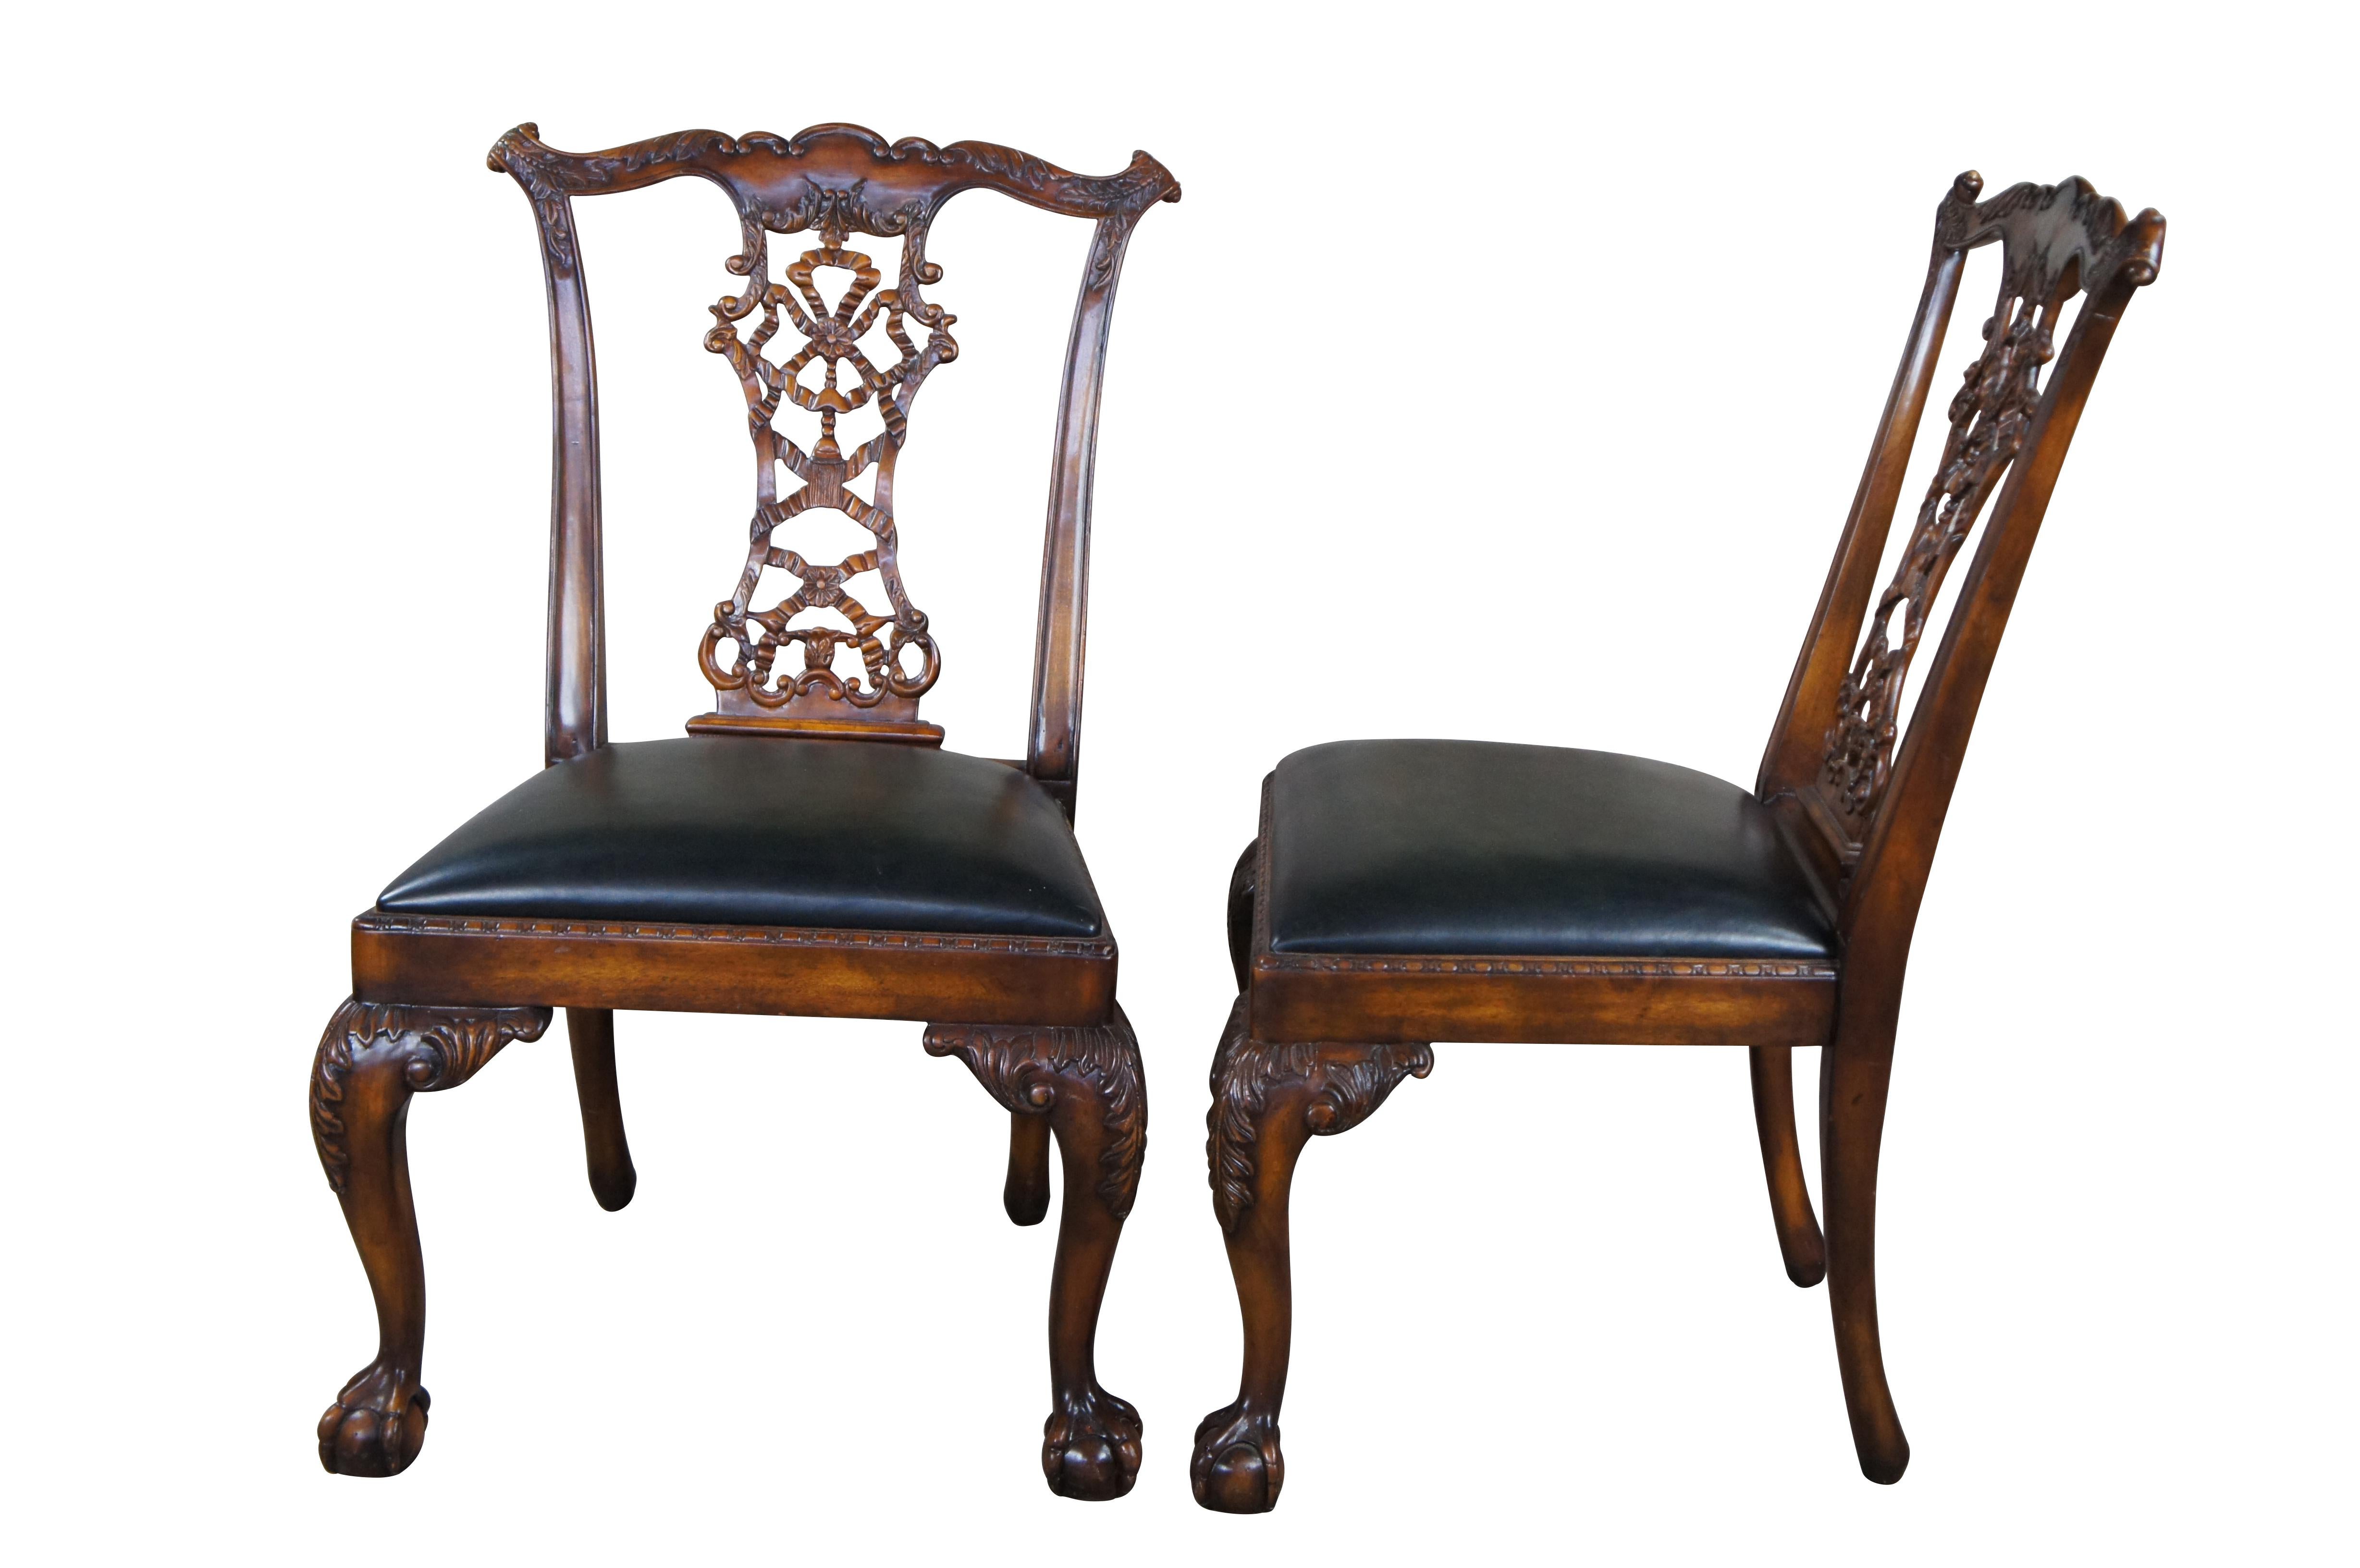 Pair of Theodore Alexander Chippendale Dining Side Chairs.  Features a serpentine crest rail with cared ears over an ornate pierced and ribboned back splat.  Each chair has a green leather seat surrounded by beaded accents over cabriole legs with